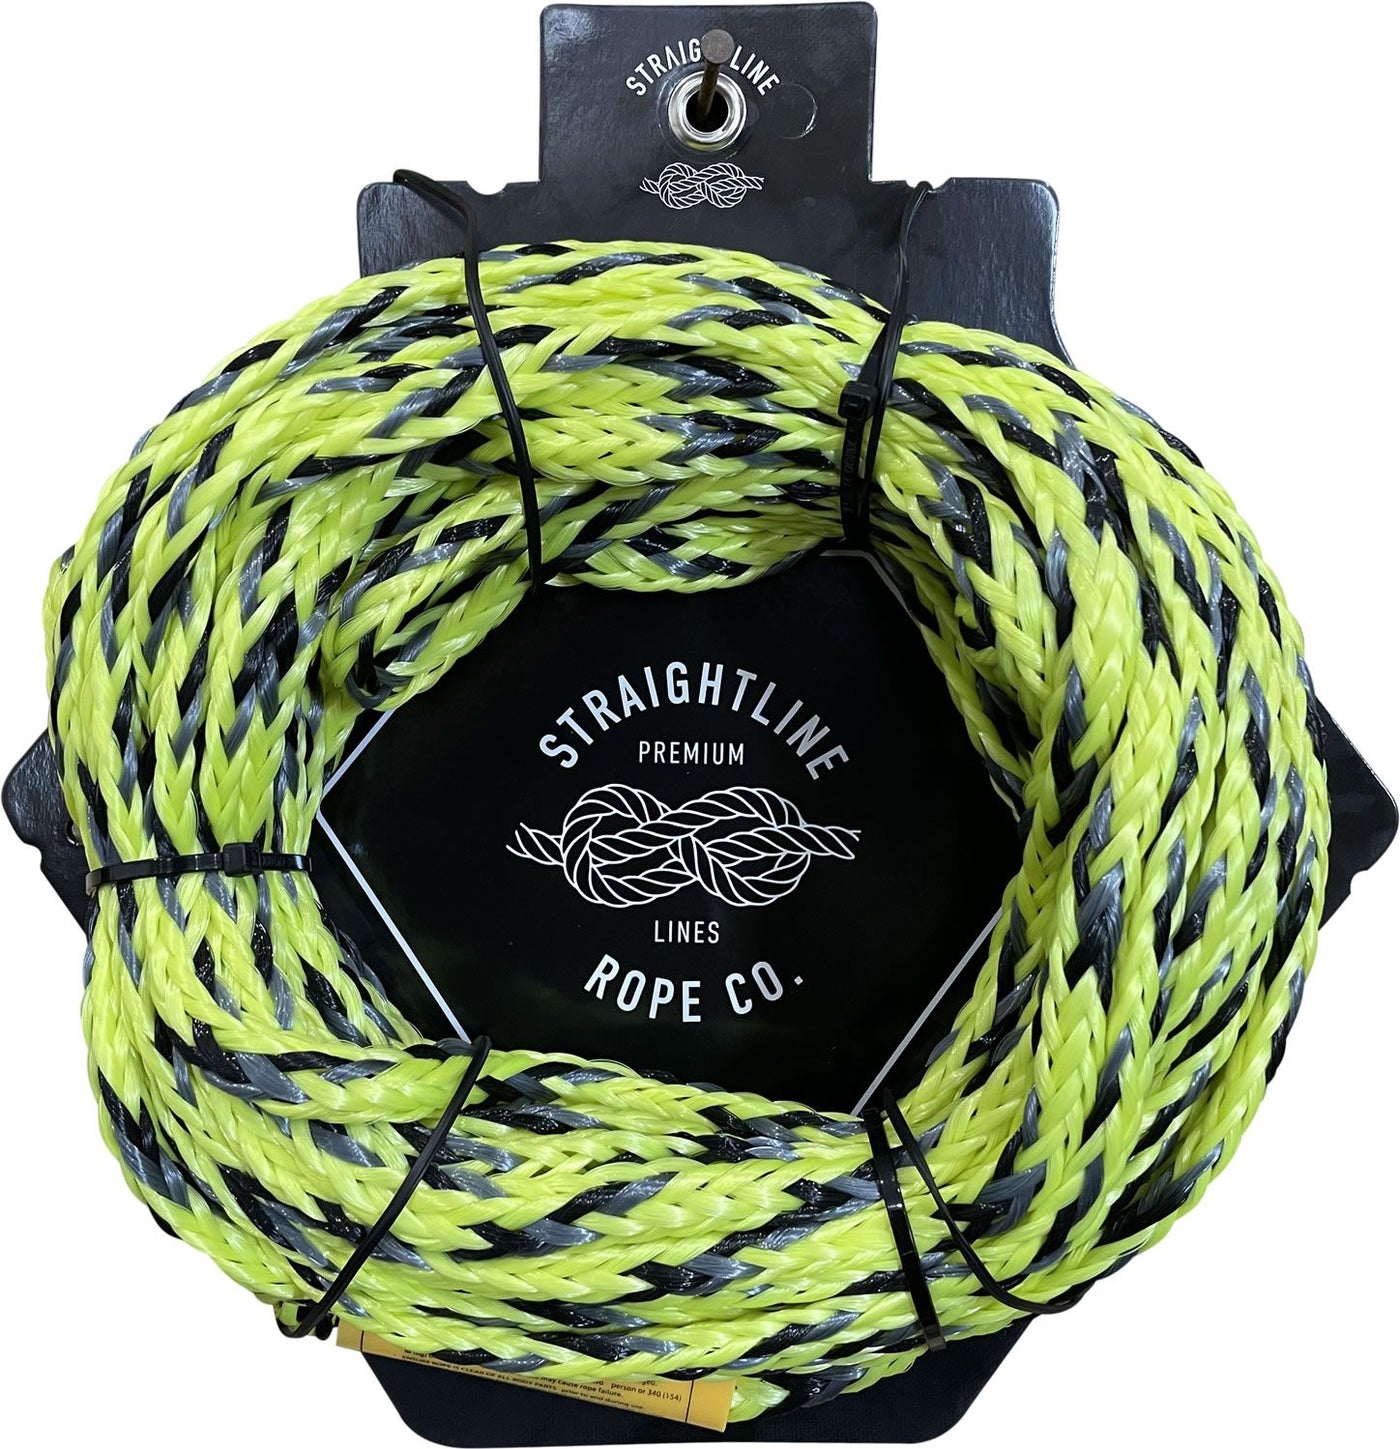 Straightline 3-4 Person Tube Rope (Yellow)